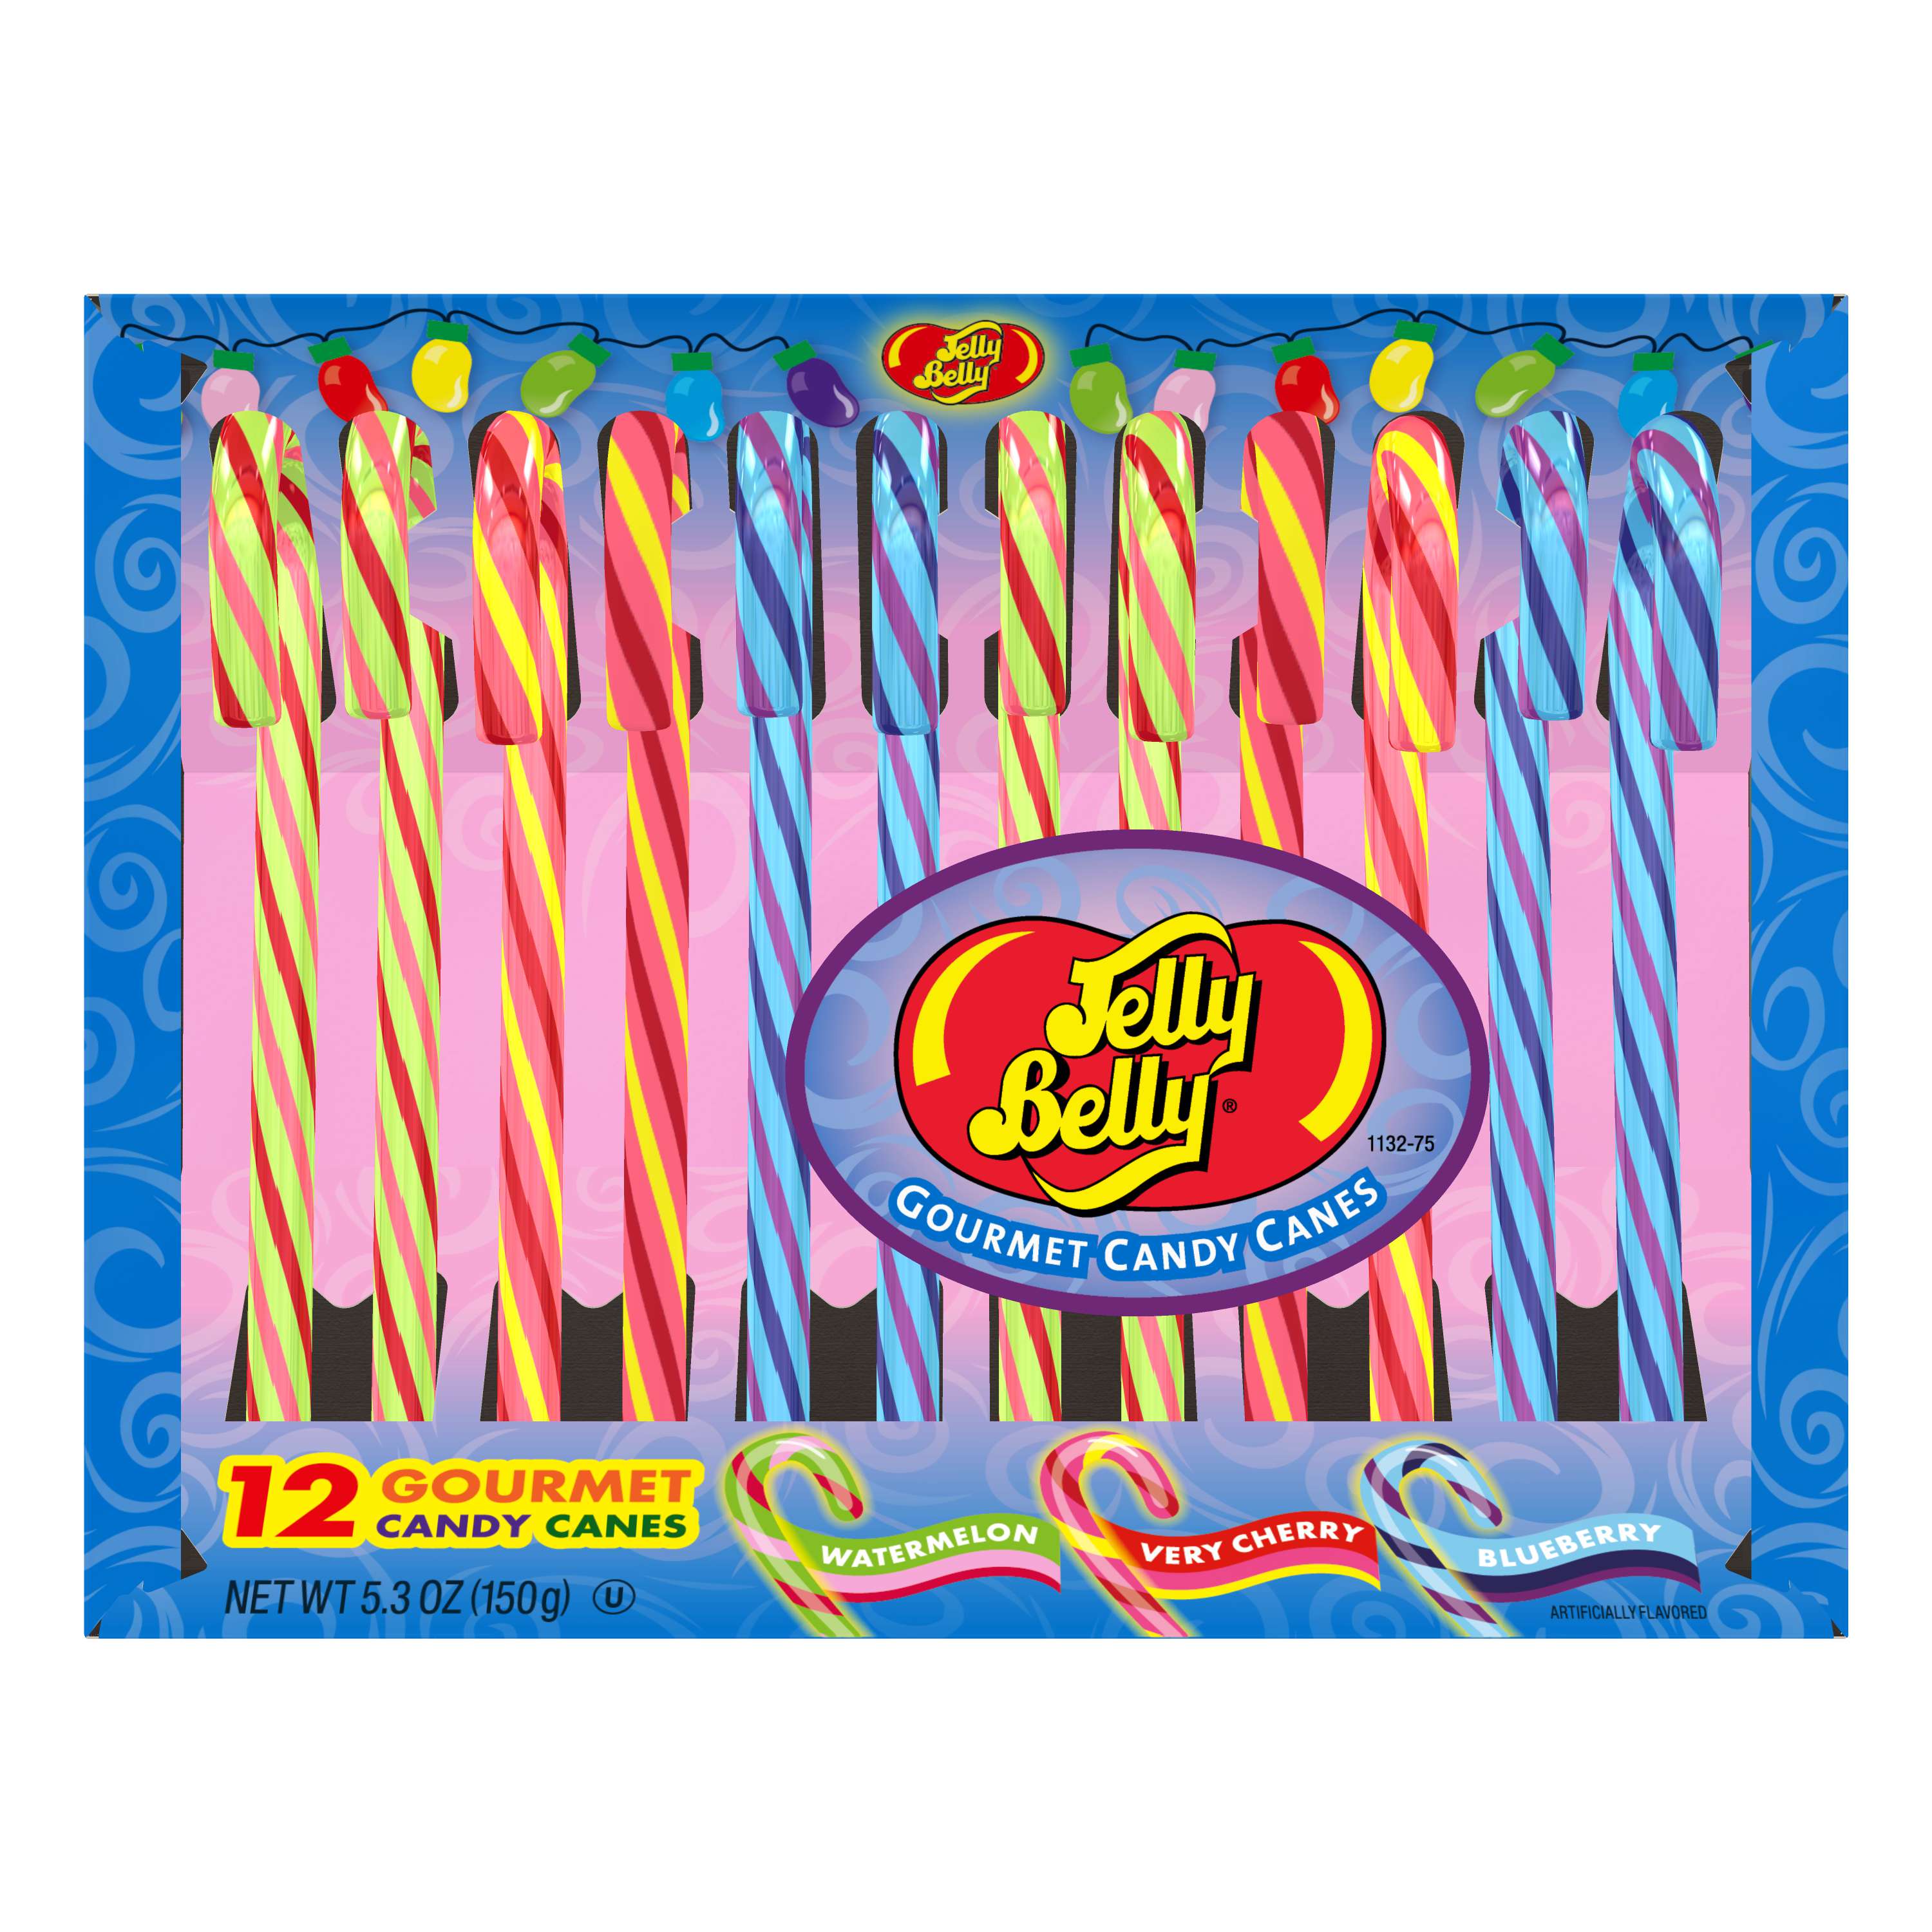 Jelly Belly Candy Canes, 3 Flavor Assortment, 12 Ct, 5.3 Oz , CVS